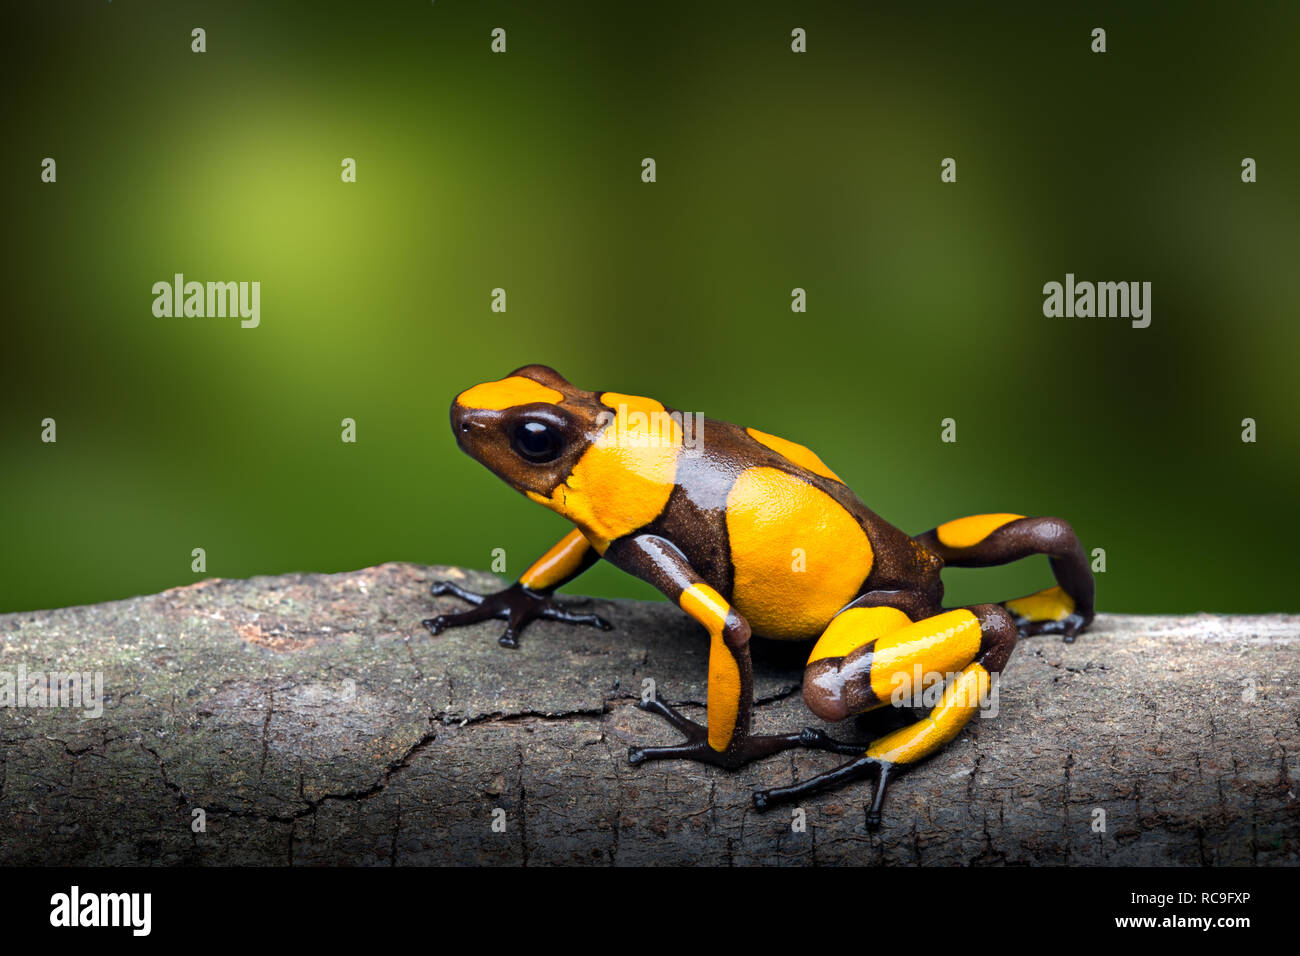 Yellow banded poison dart frog, Oophaga histrionica. A small poisonous animal from the rain forest of Colombia with a bright warning color. Stock Photo